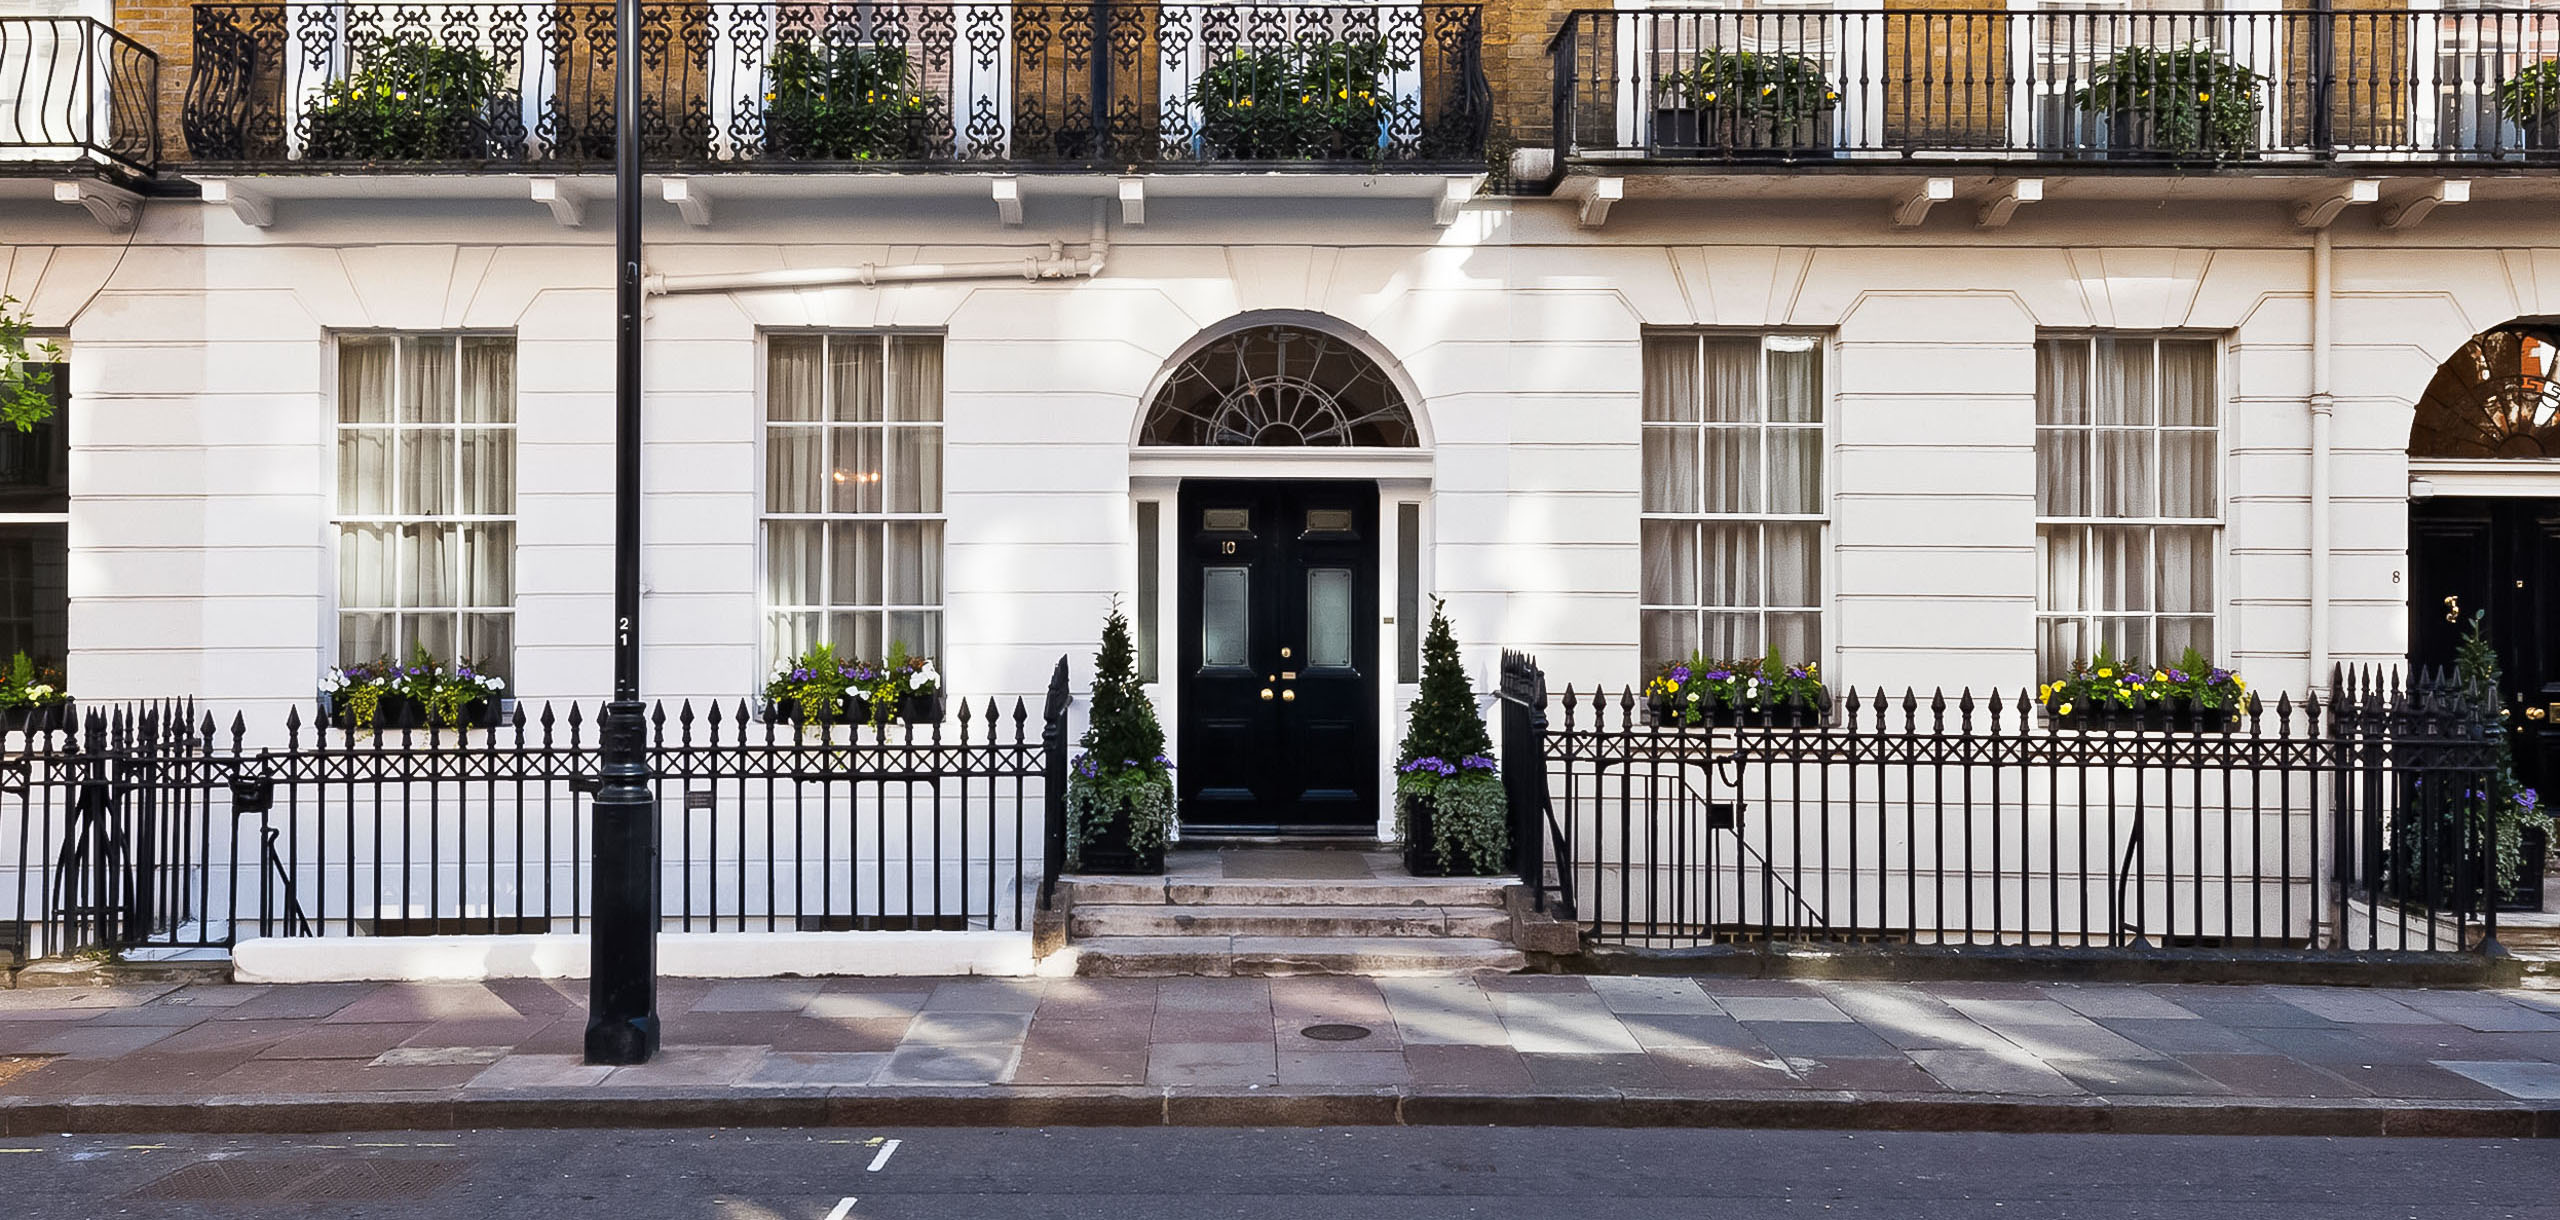 Ten Harley Street view from outside